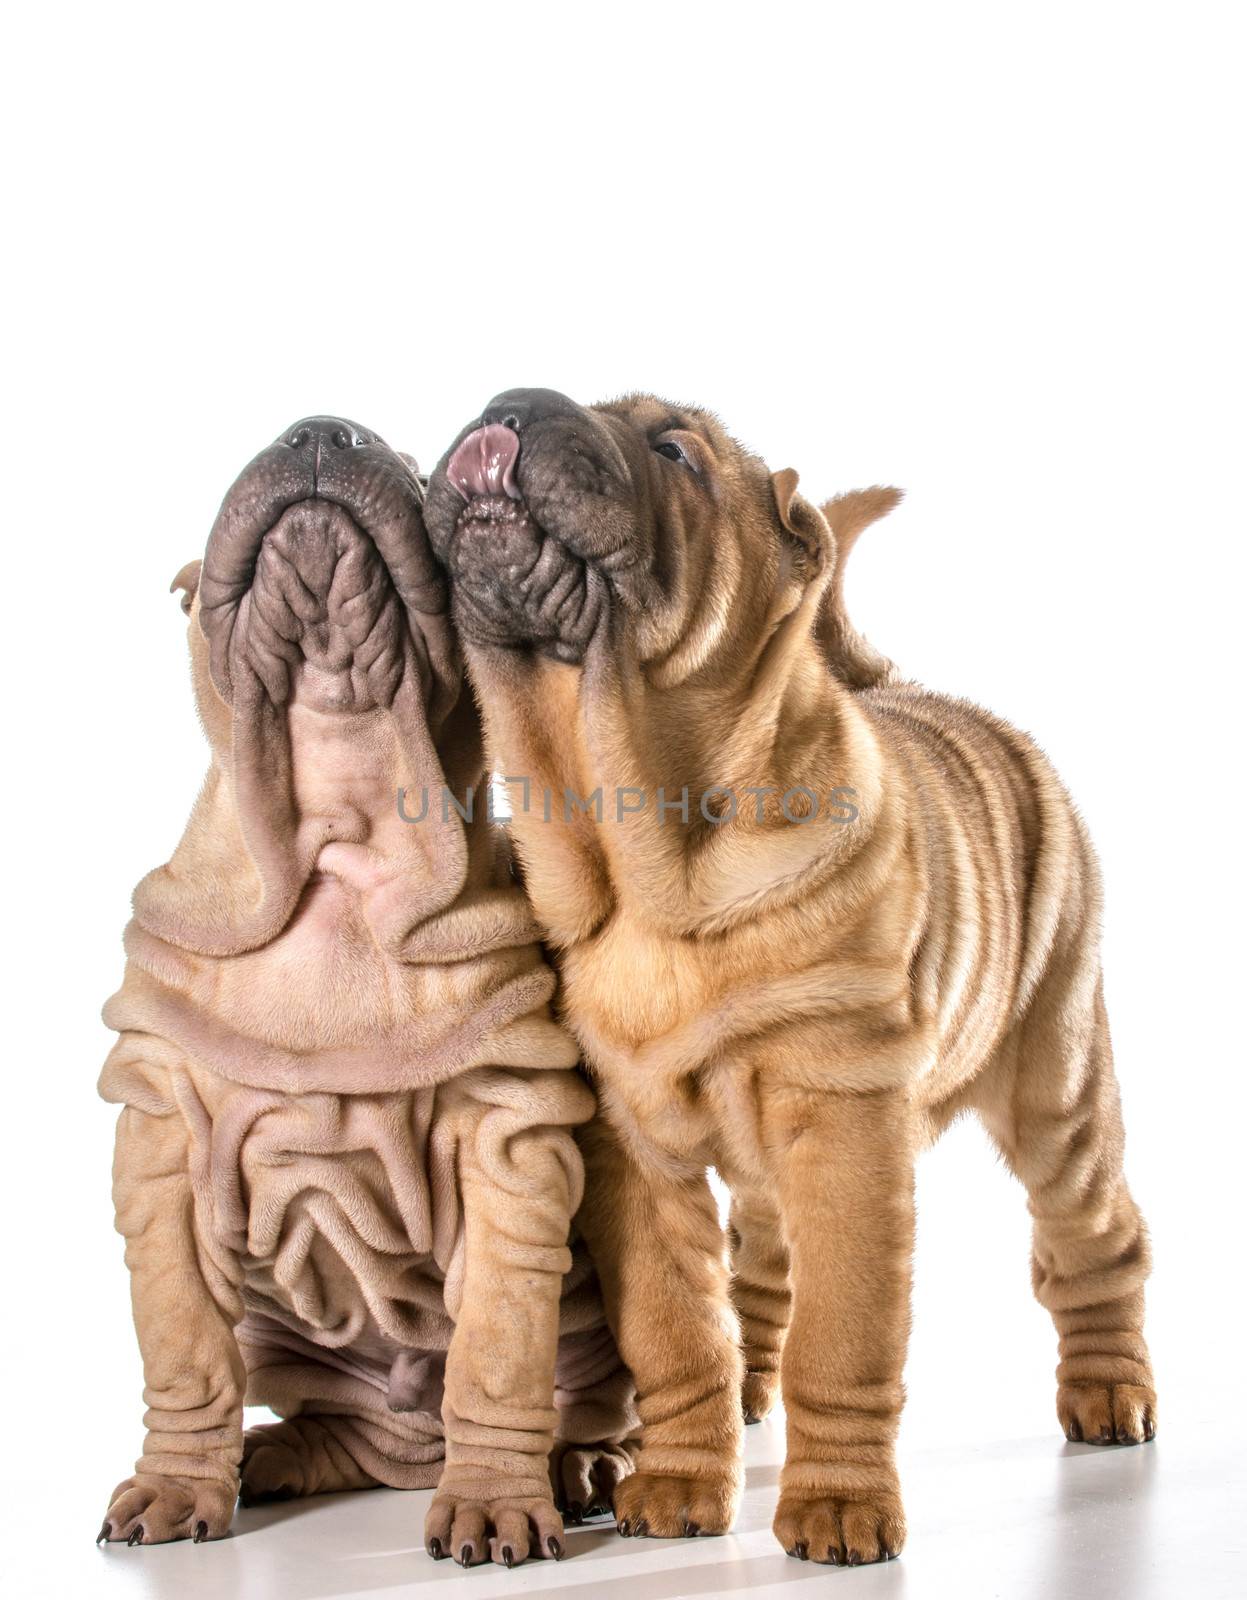 two chinese shar pei puppies looking up isolated on white background - 4 months old